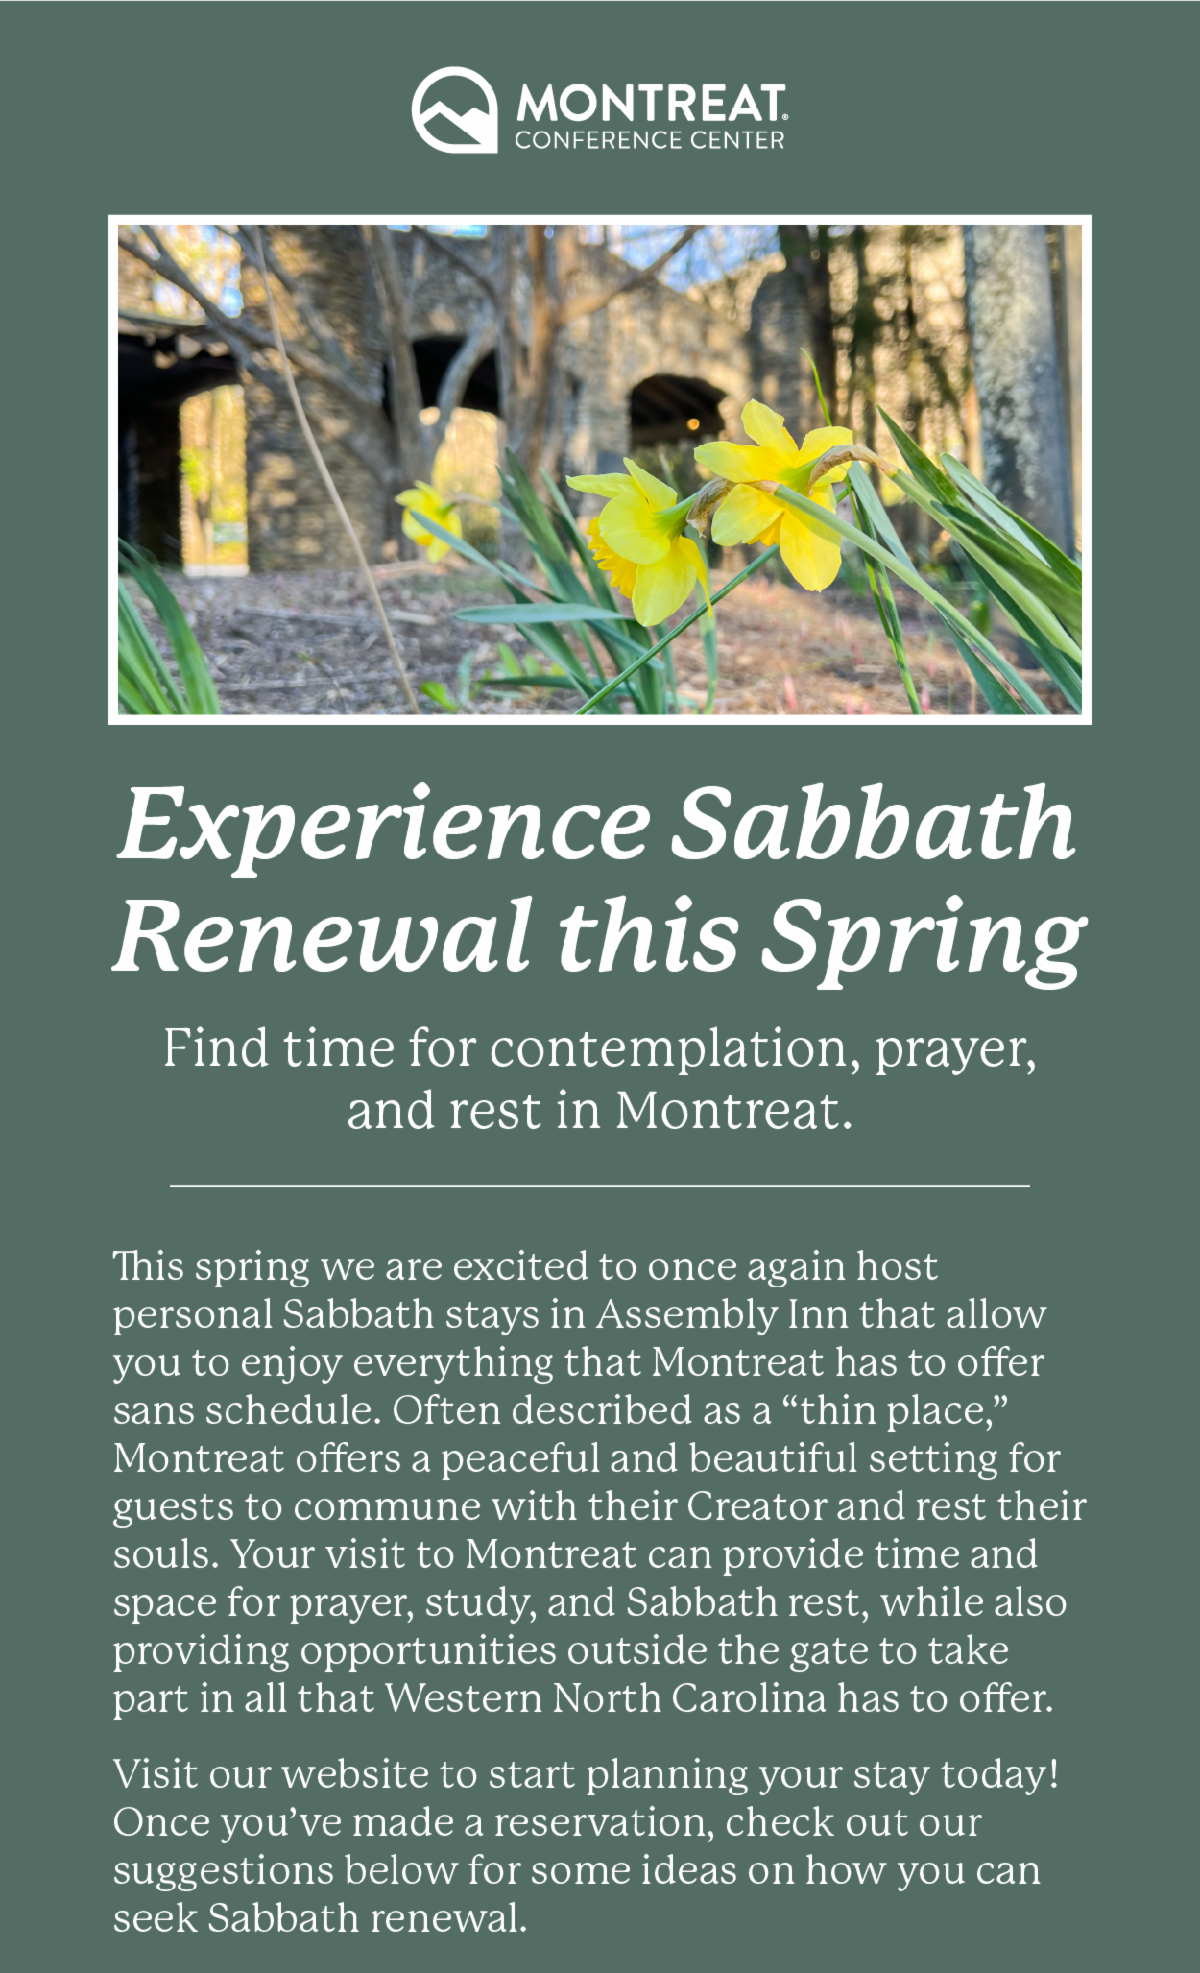 Experience Sabbath Renewal this Spring: Find time for contemplation, prayer, and rest in Montreat. - This spring we are excited to once again host personal Sabbath stays in Assembly Inn that allow you to enjoy everything that Montreat has to offer sans schedule. Often described as a “thin place,” Montreat offers a peaceful and beautiful setting for guests to commune with their Creator and rest their souls. Your visit to Montreat can provide time and space for prayer, study, and Sabbath rest, while also providing opportunities outside the gate to take part in all that Western North Carolina has to offer.  Visit our website to start planning your stay today! Once you’ve made a reservation, check out our suggestions below for some ideas on how you can seek Sabbath renewal.